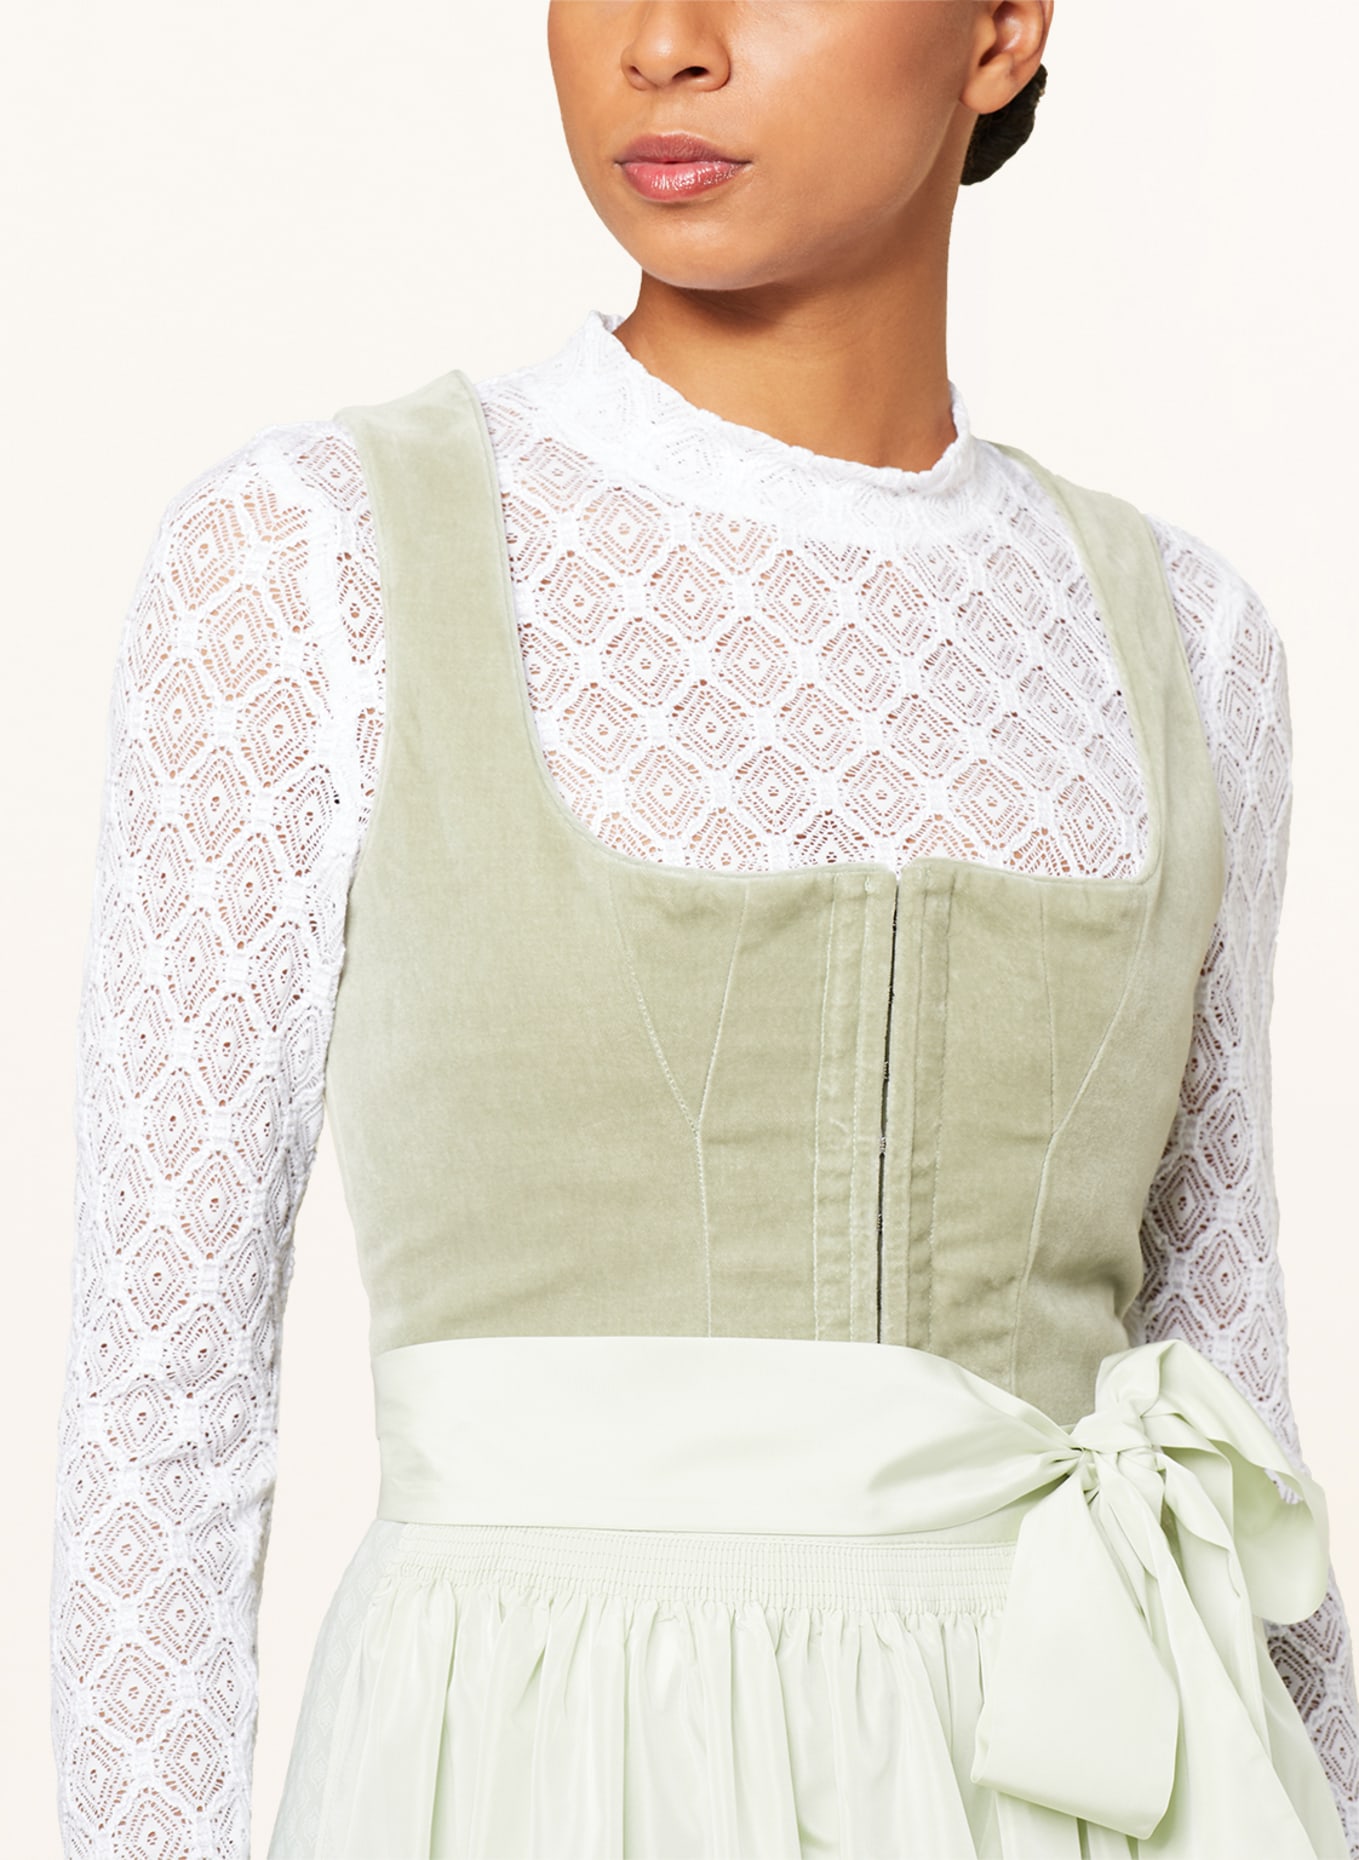 WALDORFF Dirndl blouse made of lace, Color: CREAM (Image 3)